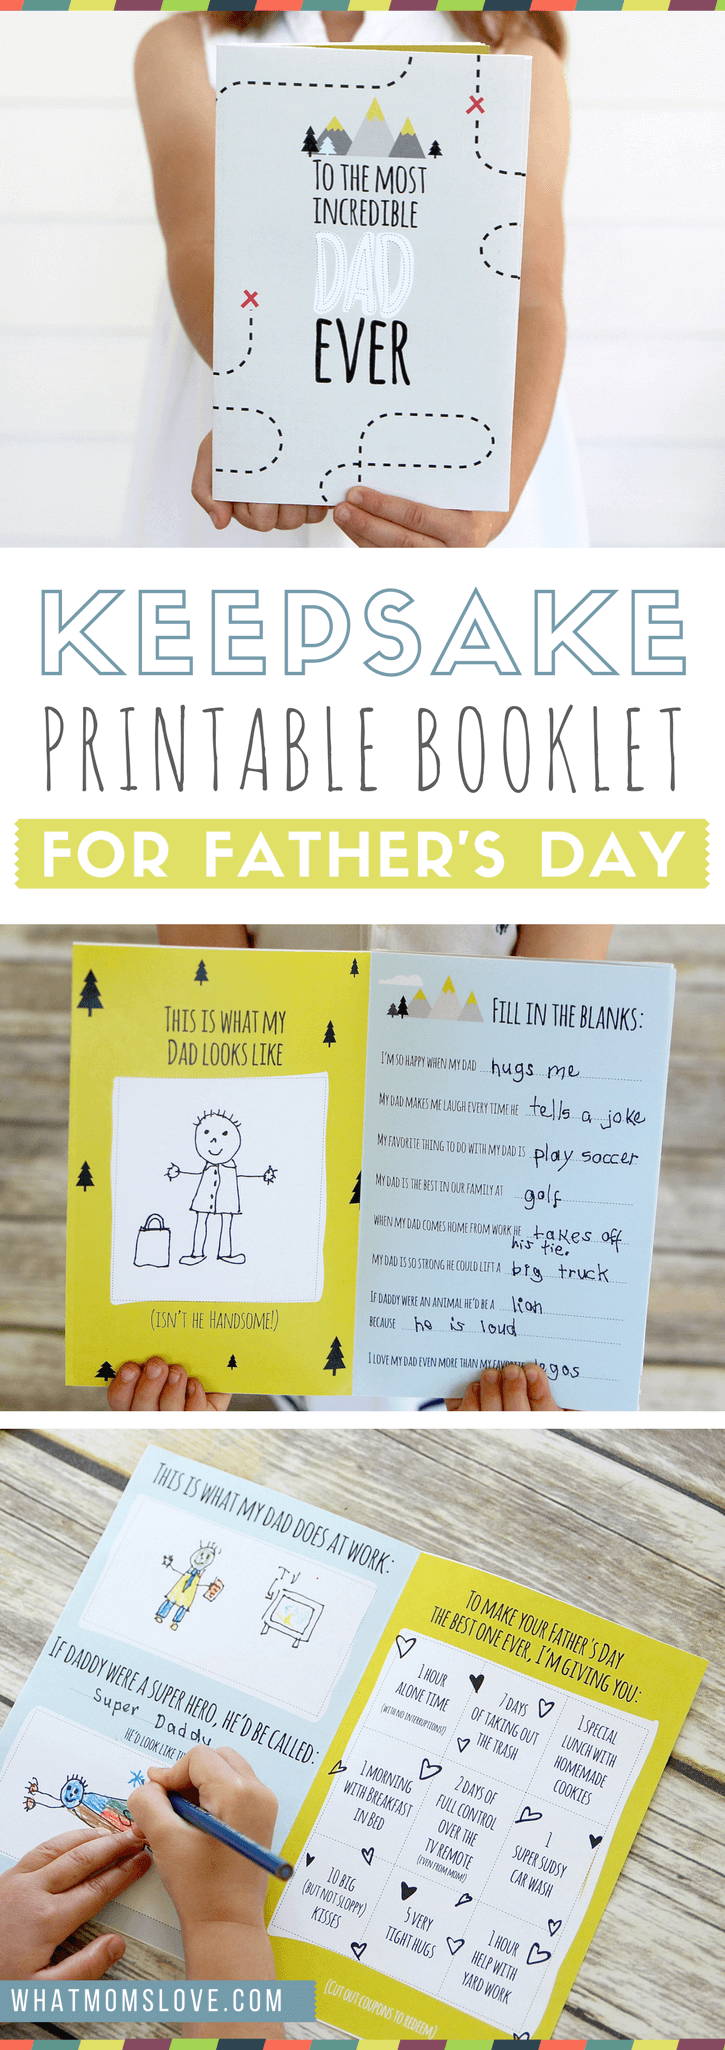 Free Printable Fathers Day Card | All About Dad or Grandpa Book for kids to make - includes fun questionnaire, coupons for dad, and space to draw and color. The perfect DIY homemade card - super easy!